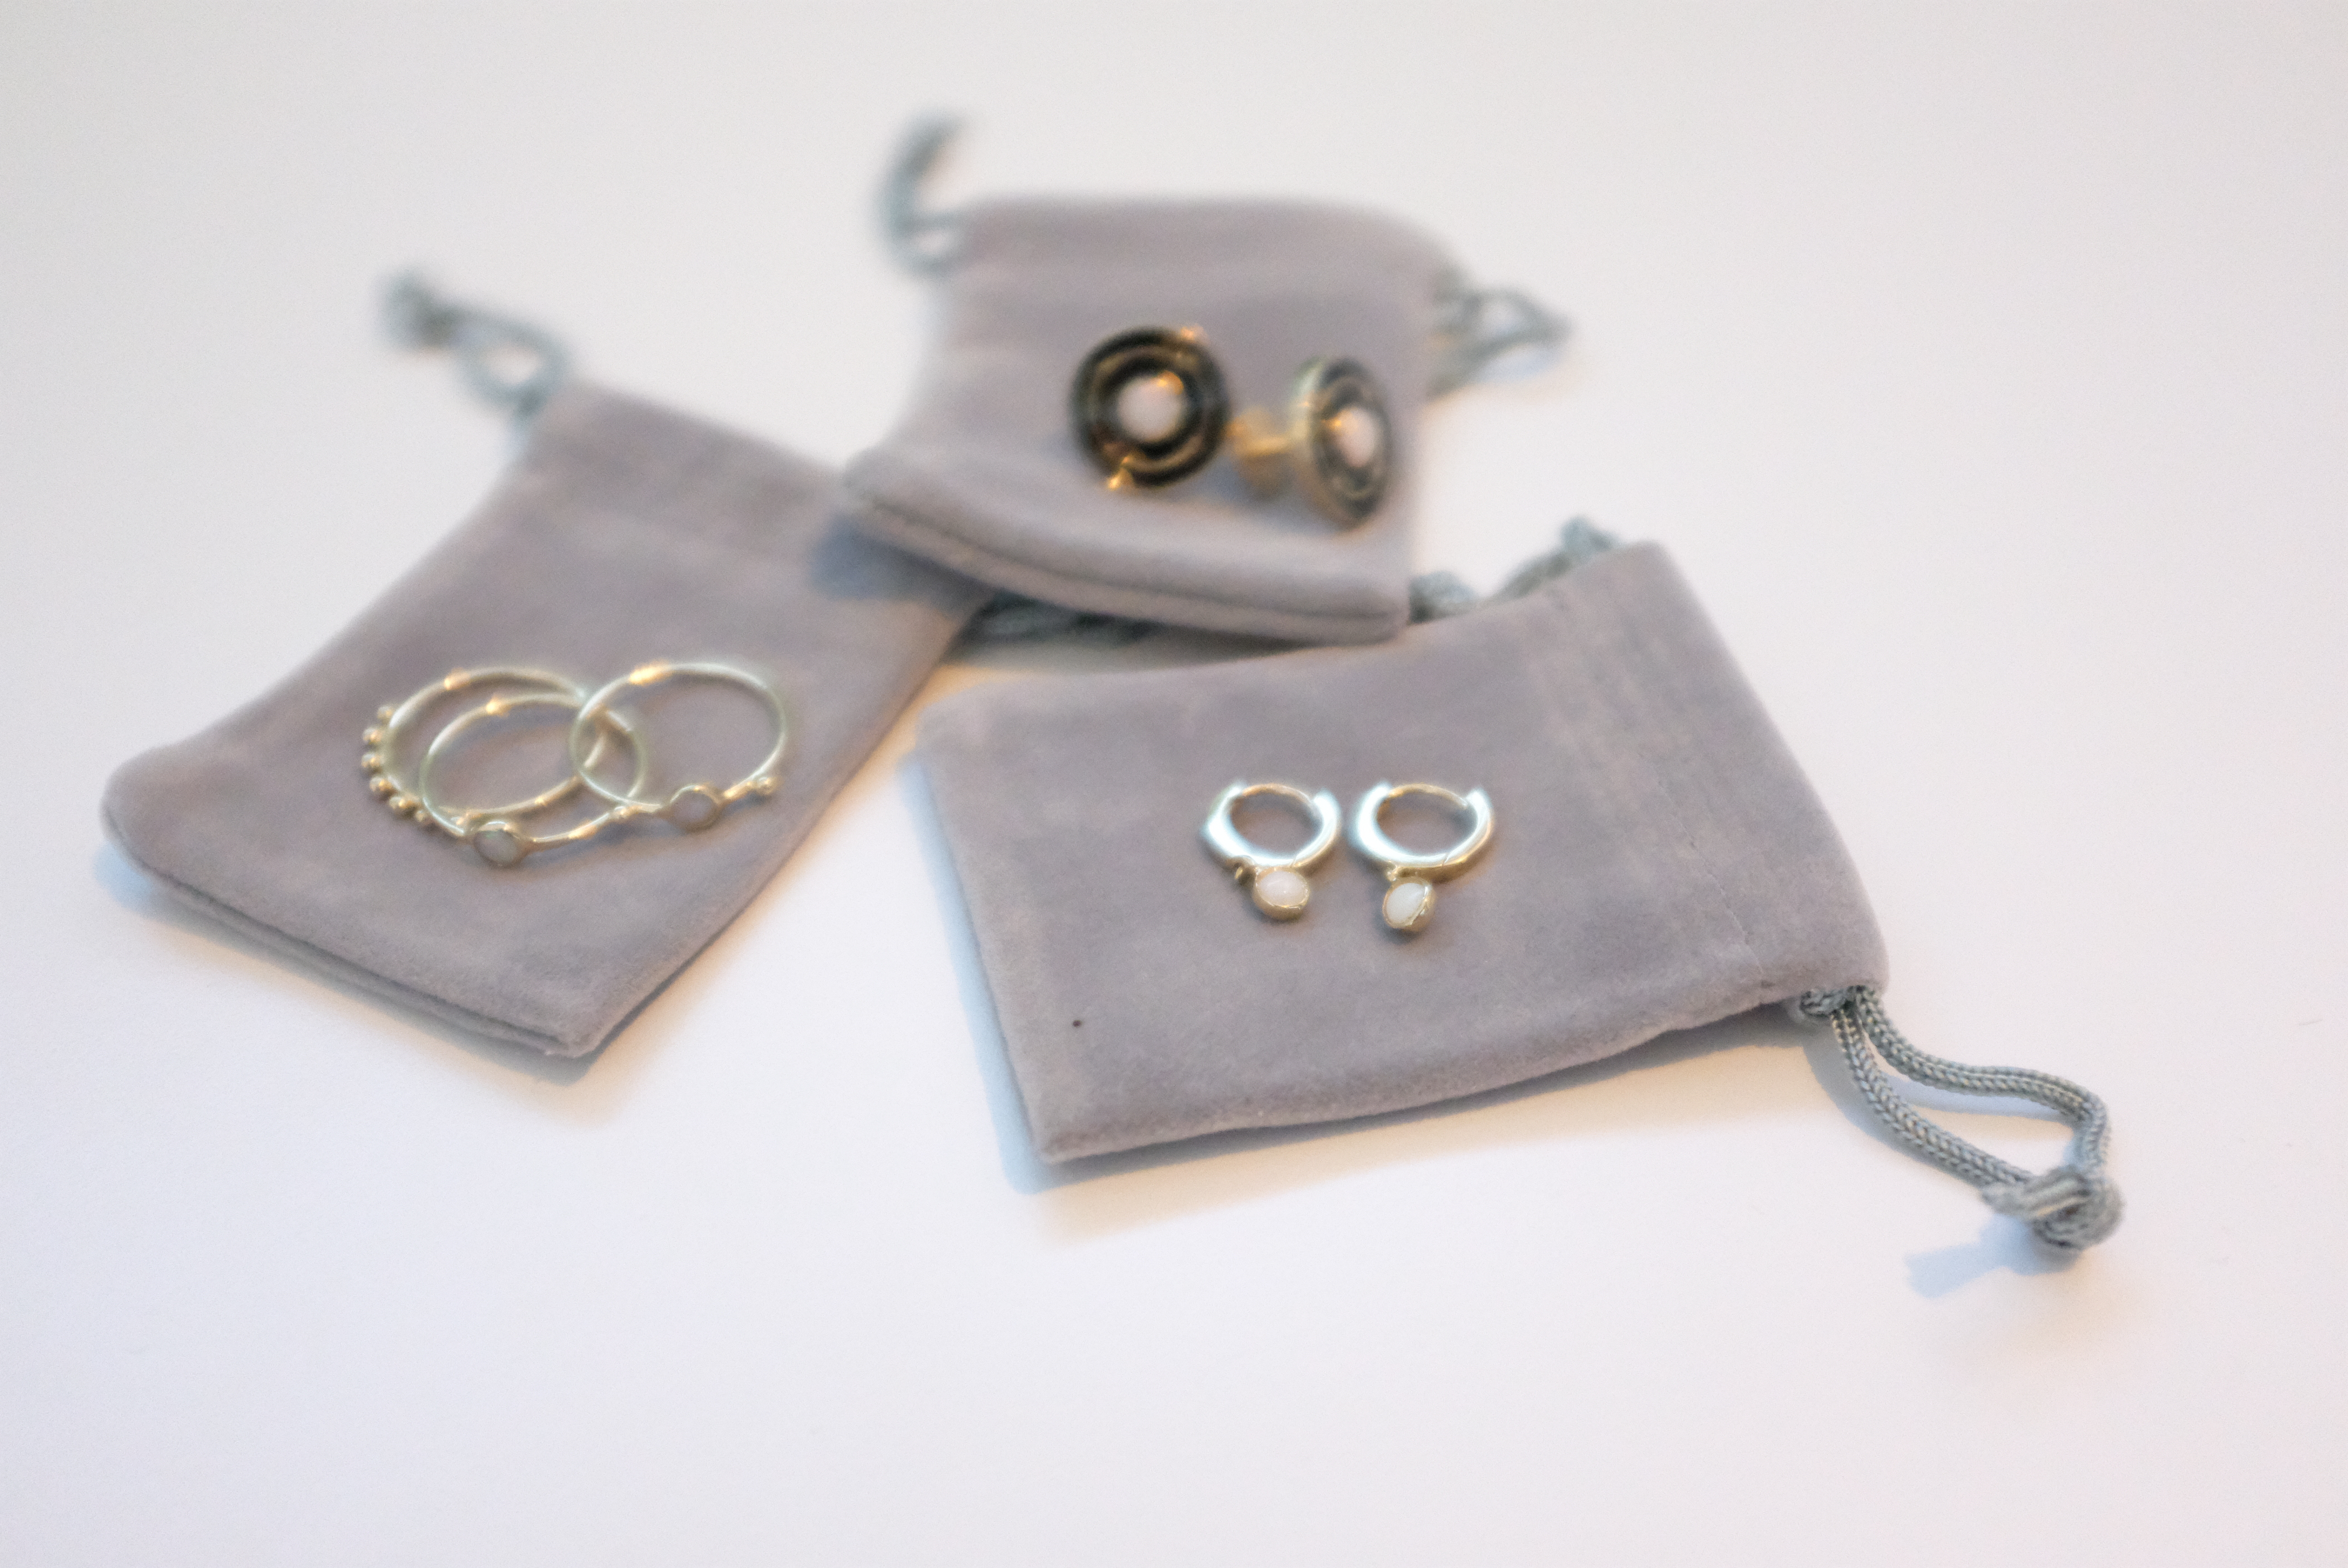 Dell is making jewelry with reclaimed gold from recycled computer guts